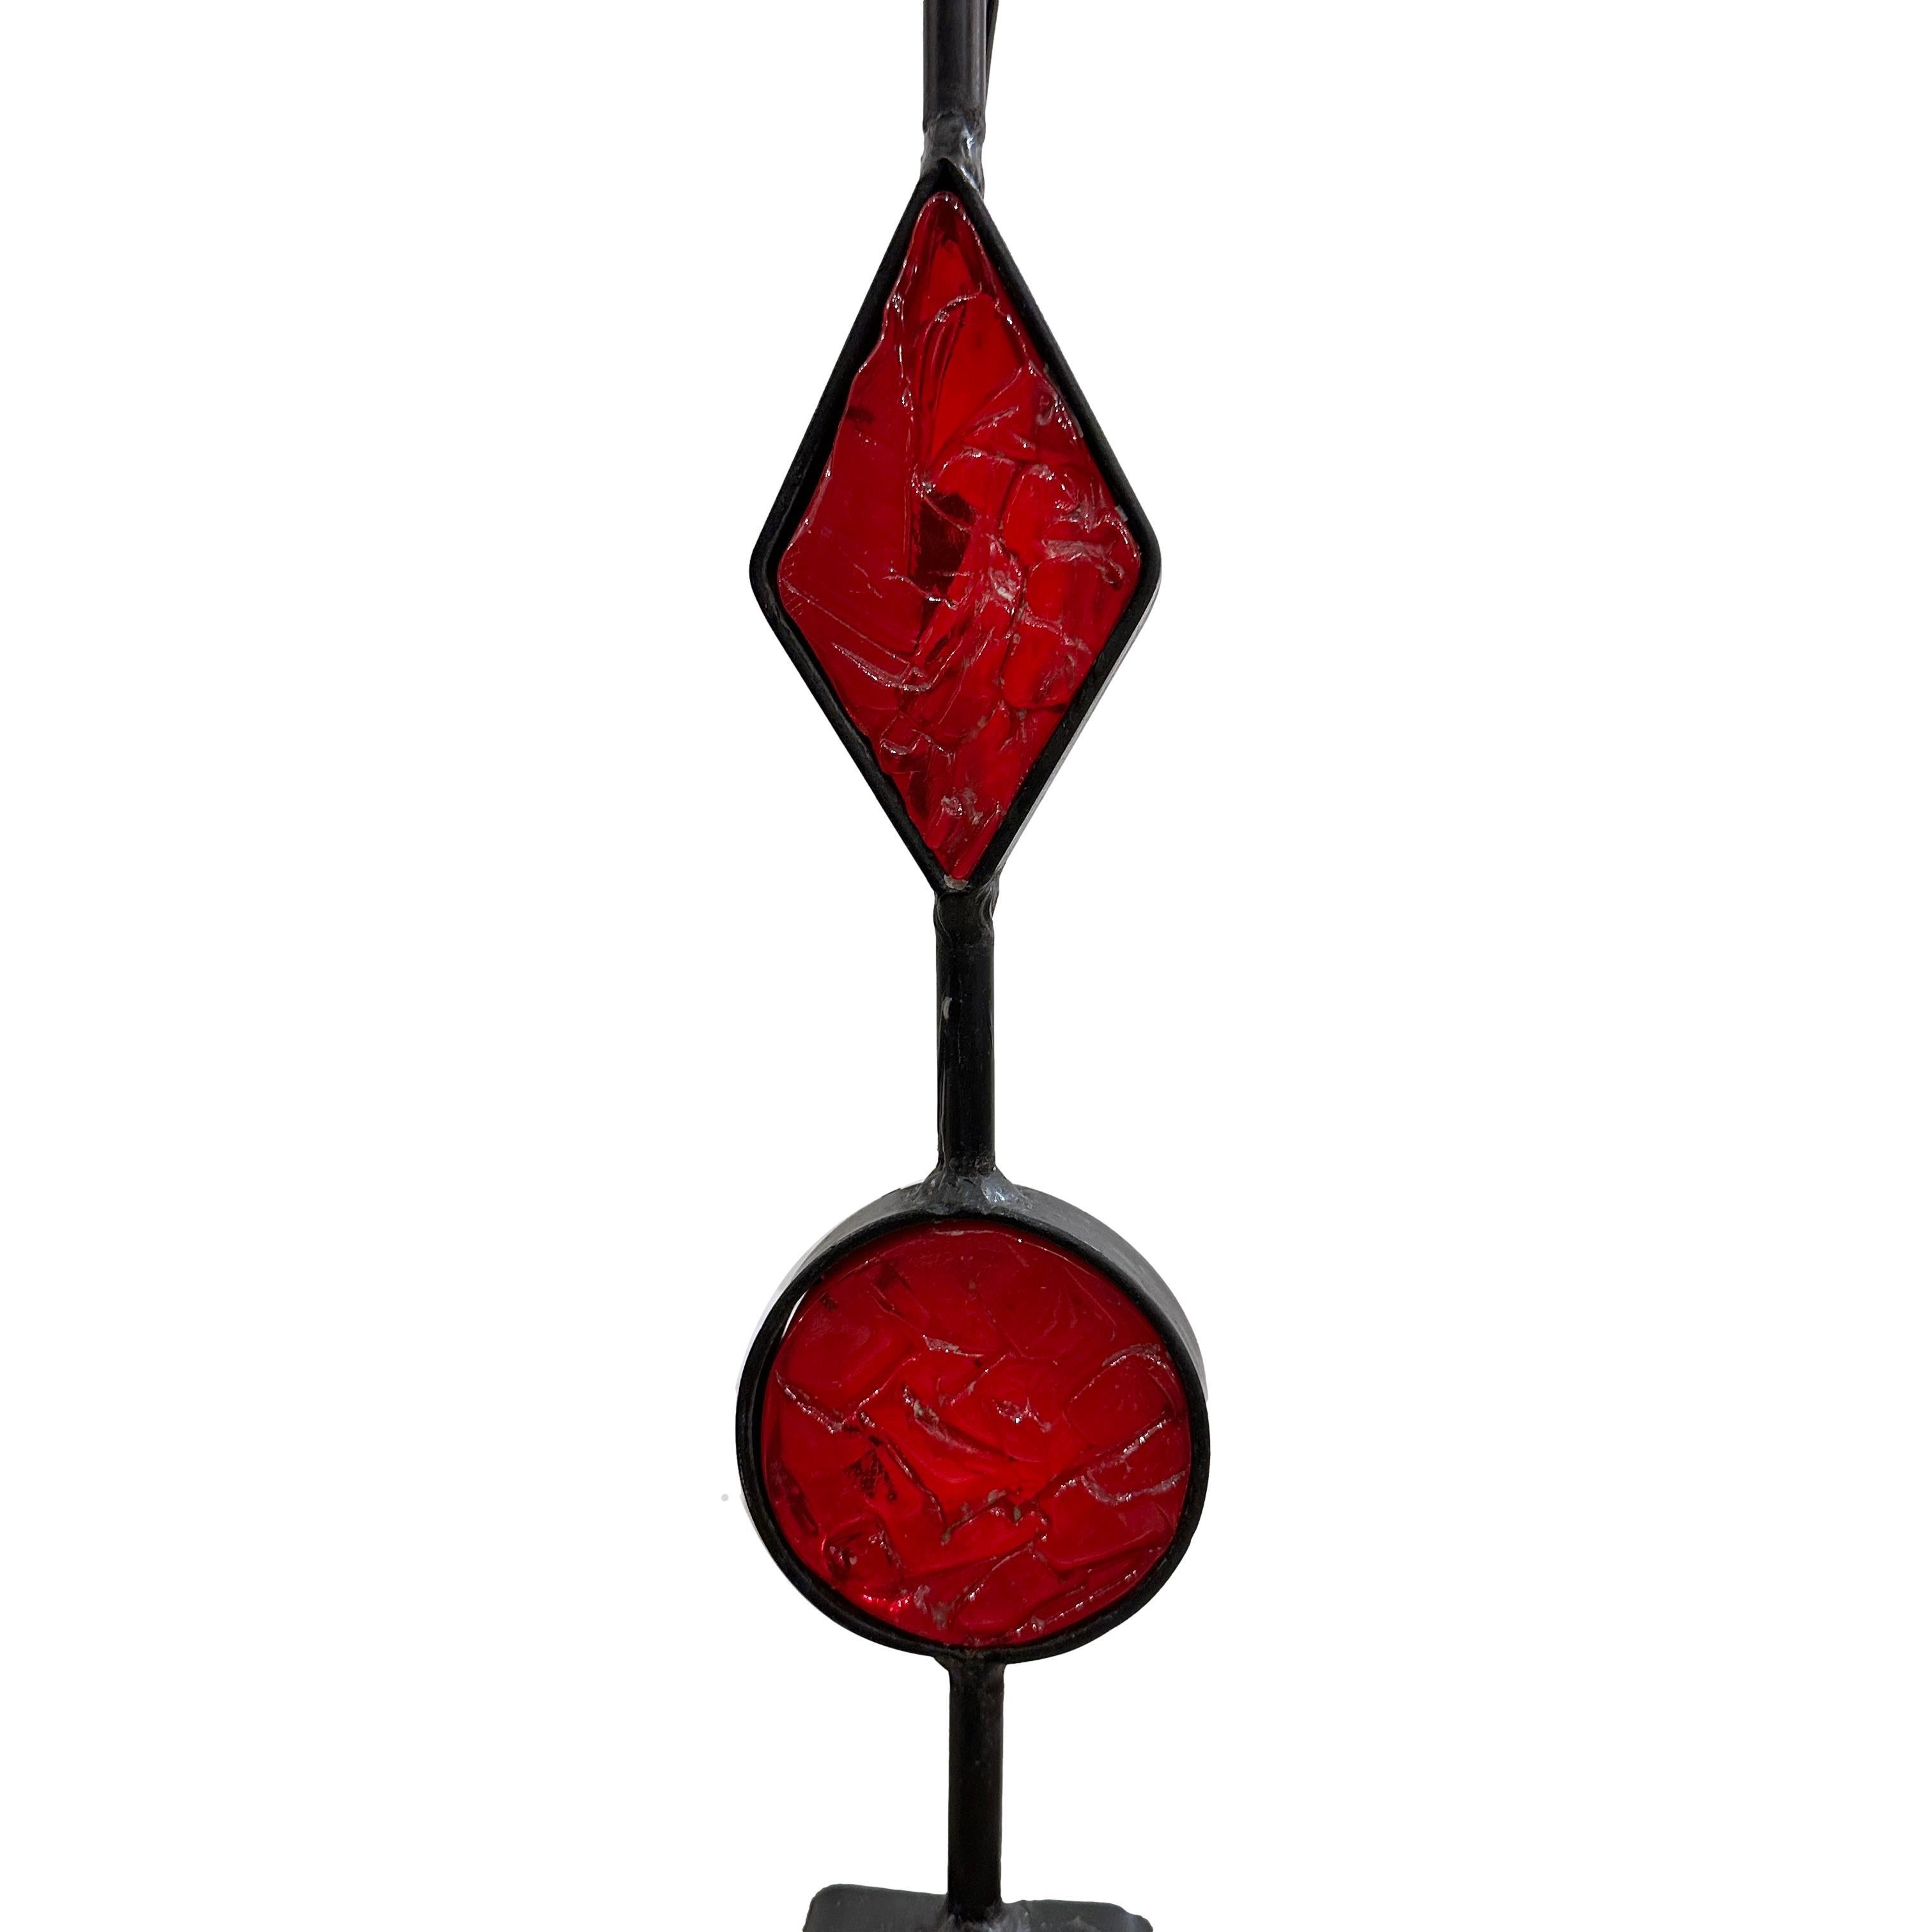 A single Danish circa 1950's iron lamp with red glass insets.

Measurements:
Total height: 49